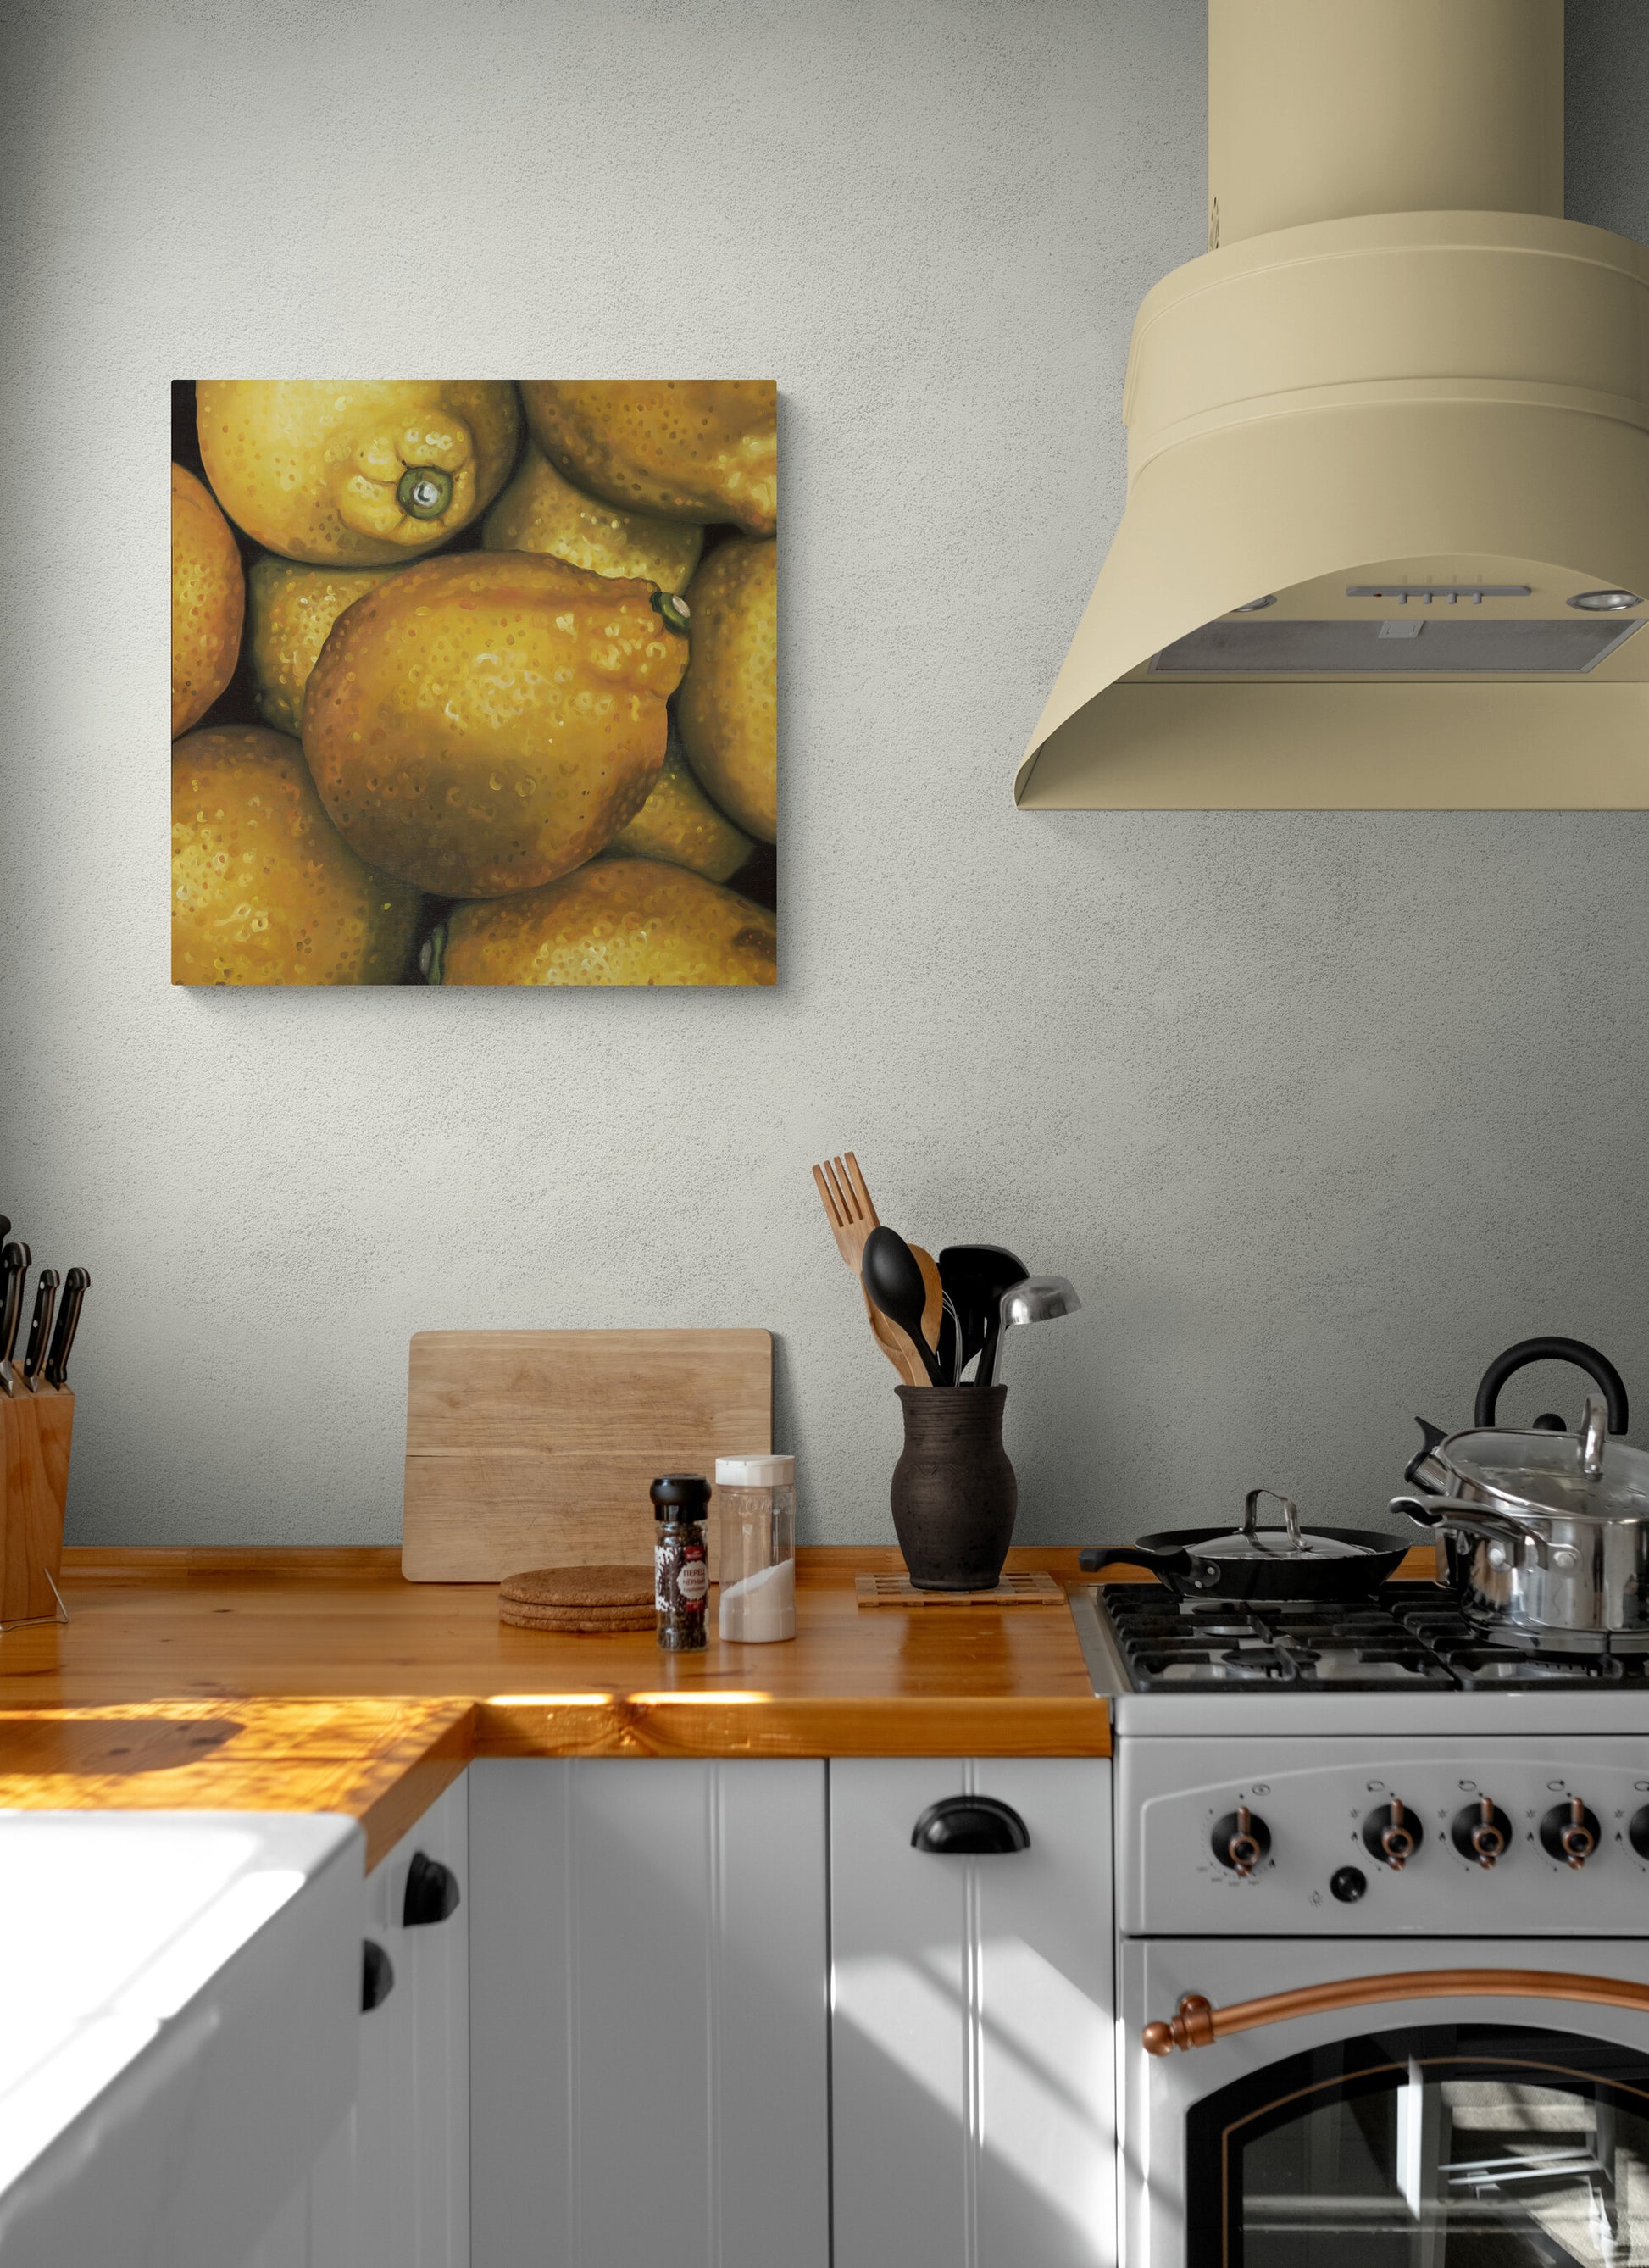 The original painting “Lemons" by Hannah Kilby from Hannah Michelle Studios, displayed as a fine art print.